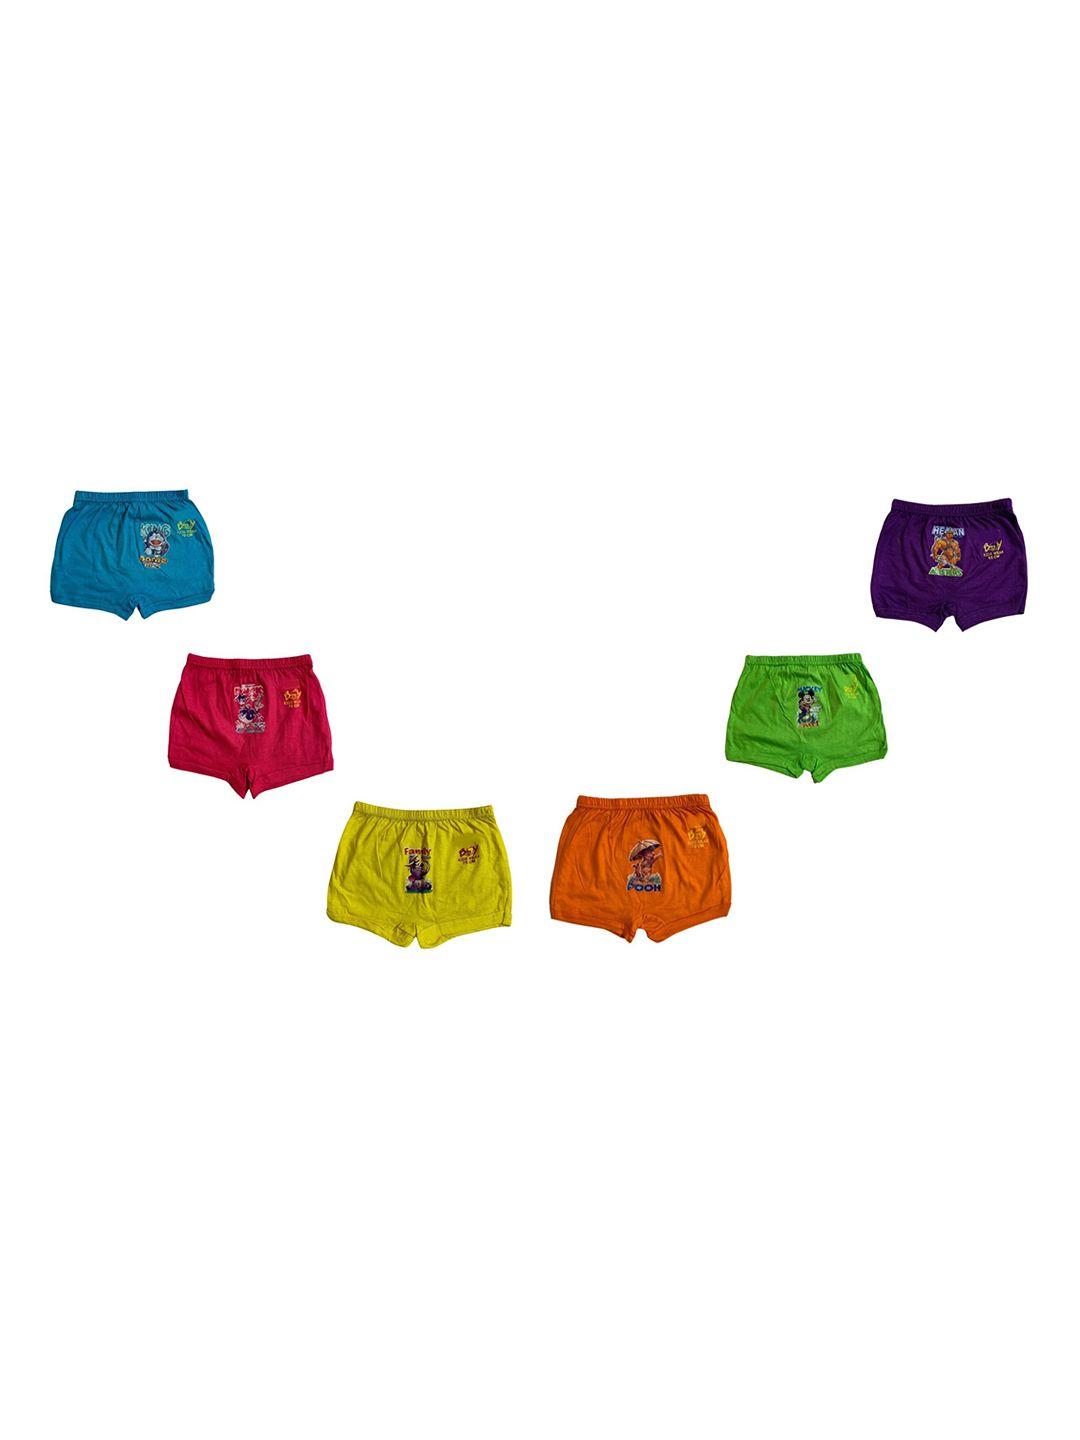 cooltees4u kids pack of 6 printed cotton boyshorts briefs